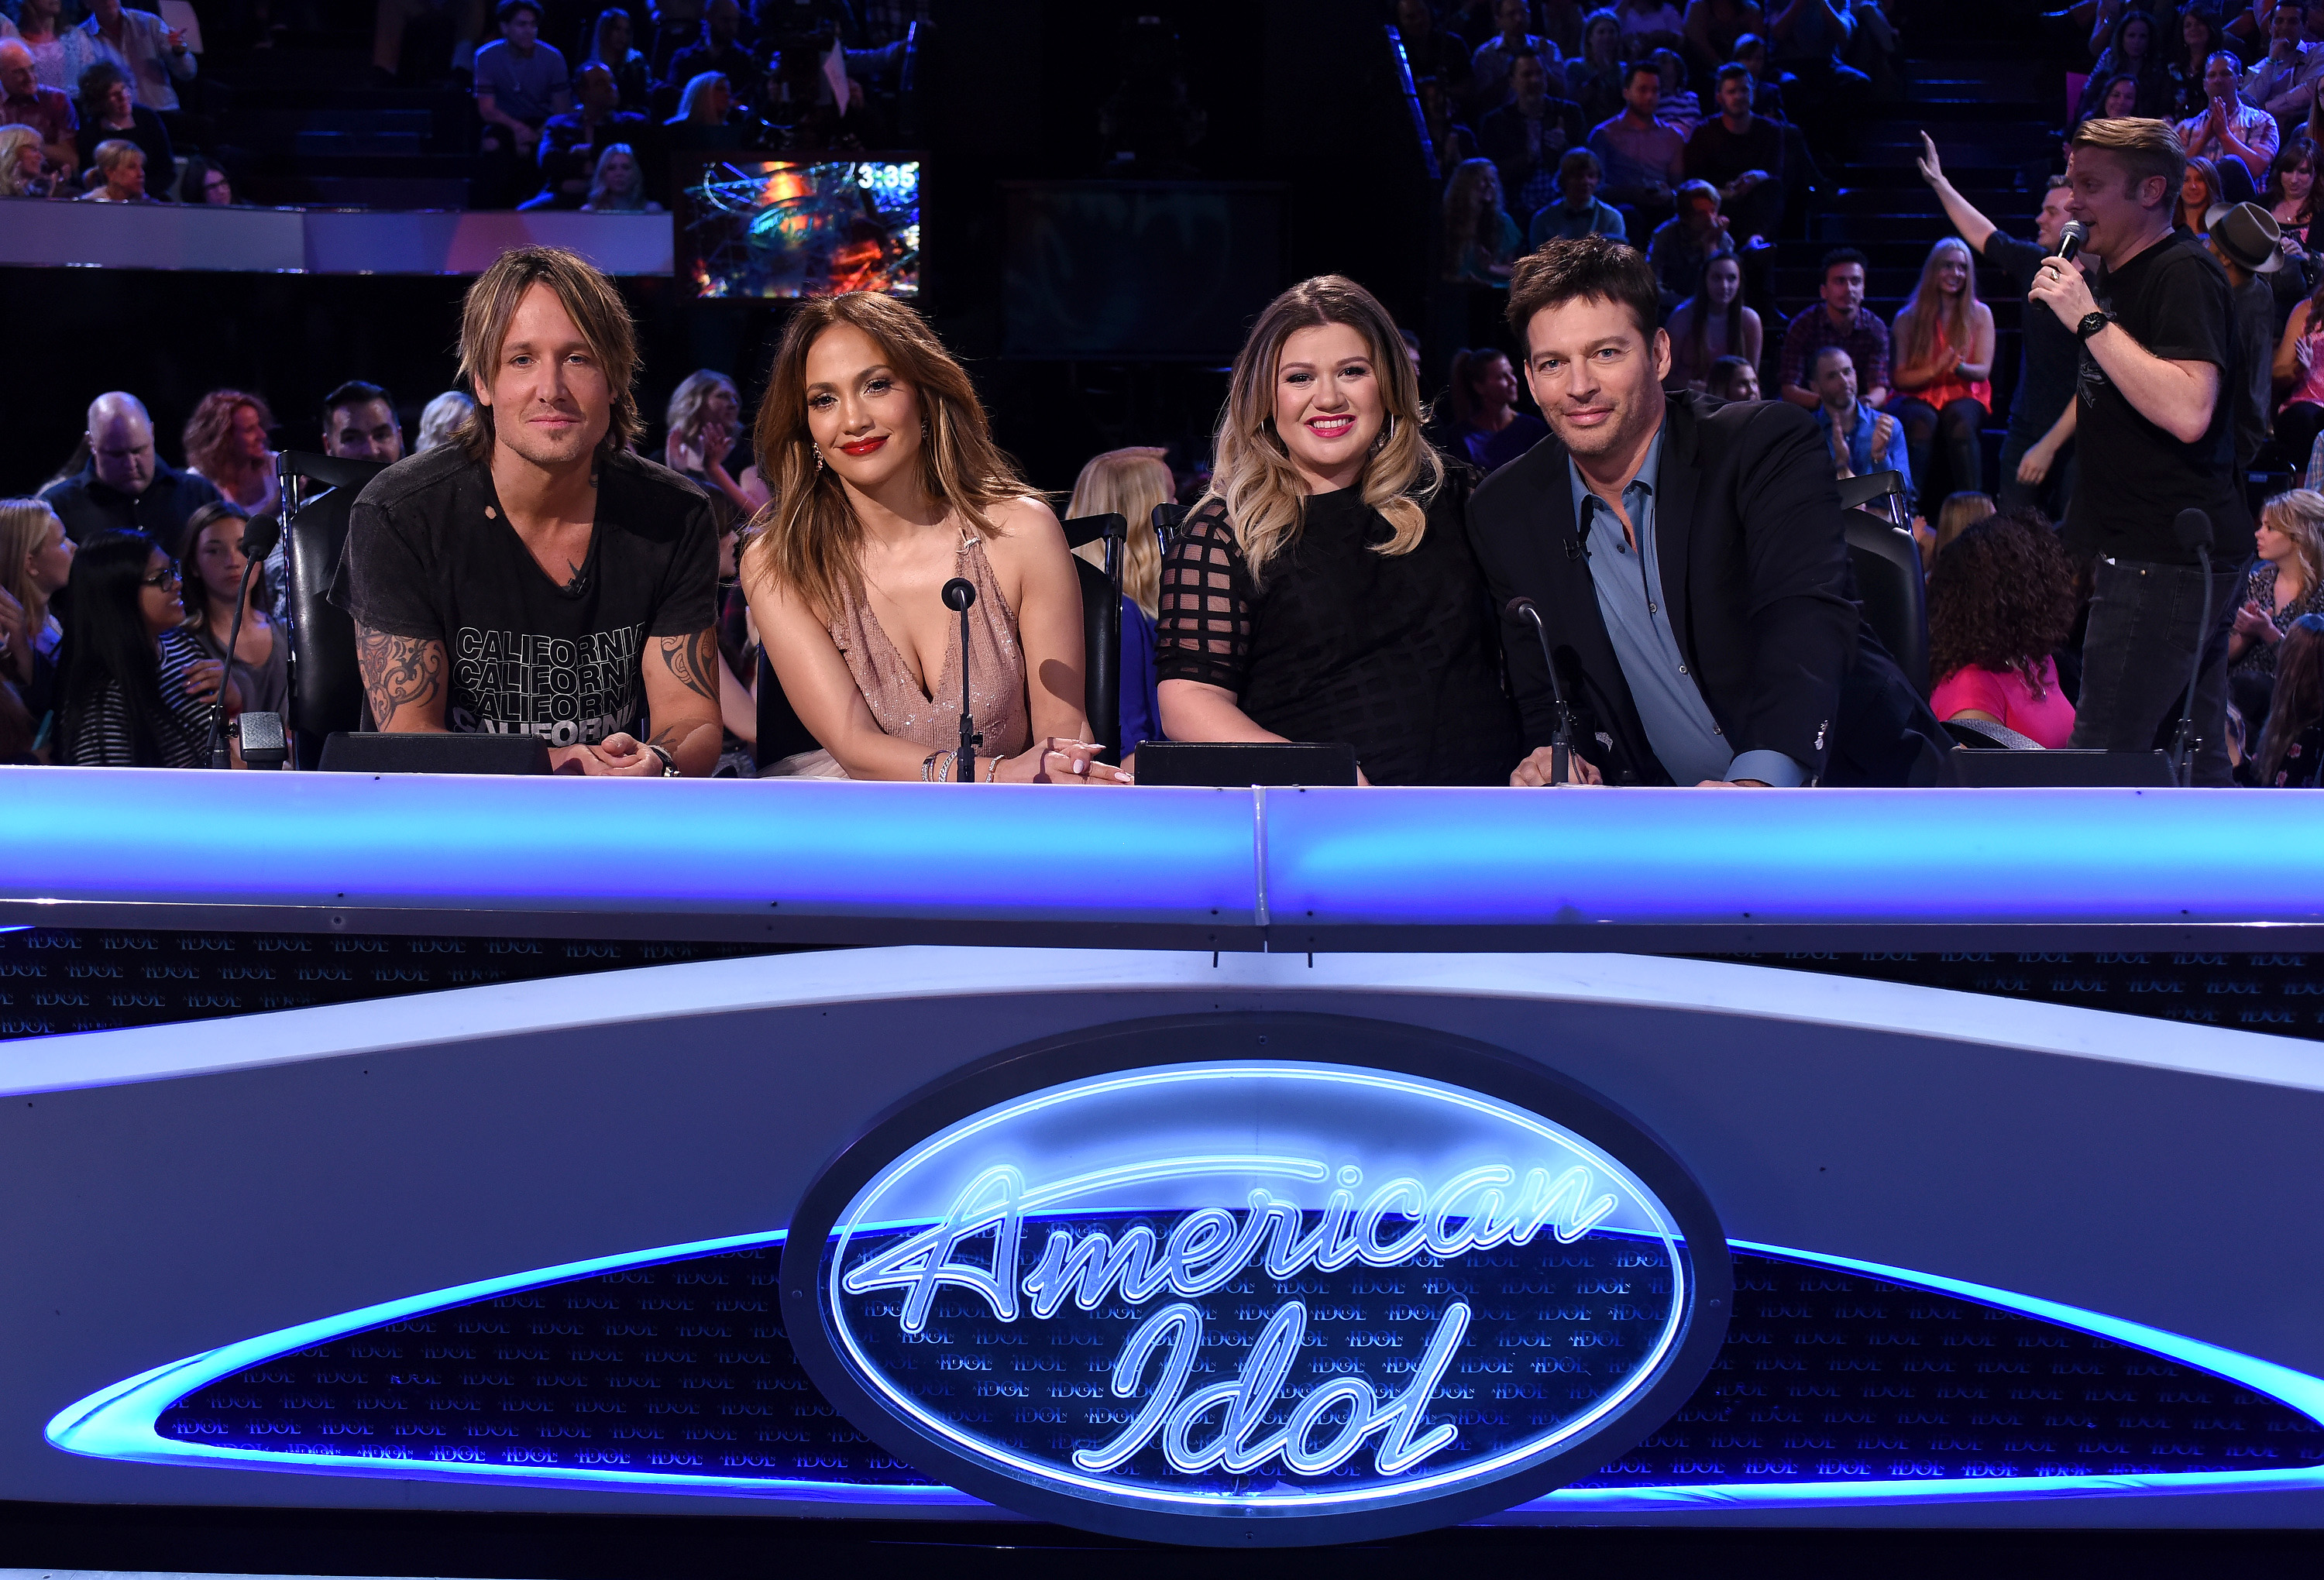 Keith Urban, Jennifer Lopez, Kelly Clarkson and Harry Connick Jr. posing for a picture while seated at the judges panel for "American Idol" in Hollywood, California on February 25, 2016 | Source: Getty Images